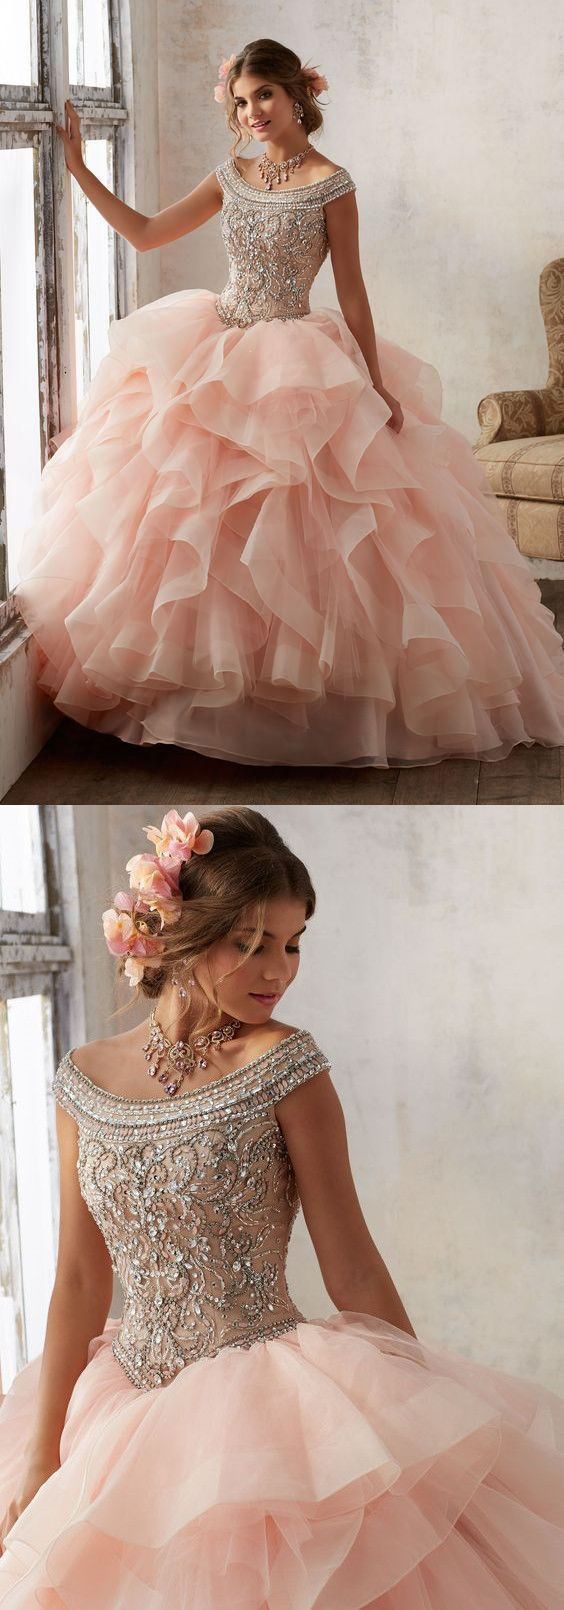 Bright Blush Pink Tulle Quinceanera Dresses Ball Gowns Strapless Sweet 16 Dress Tulle Long Cute Evening Dresses Party Gown -   19 dress Pink tulle ideas